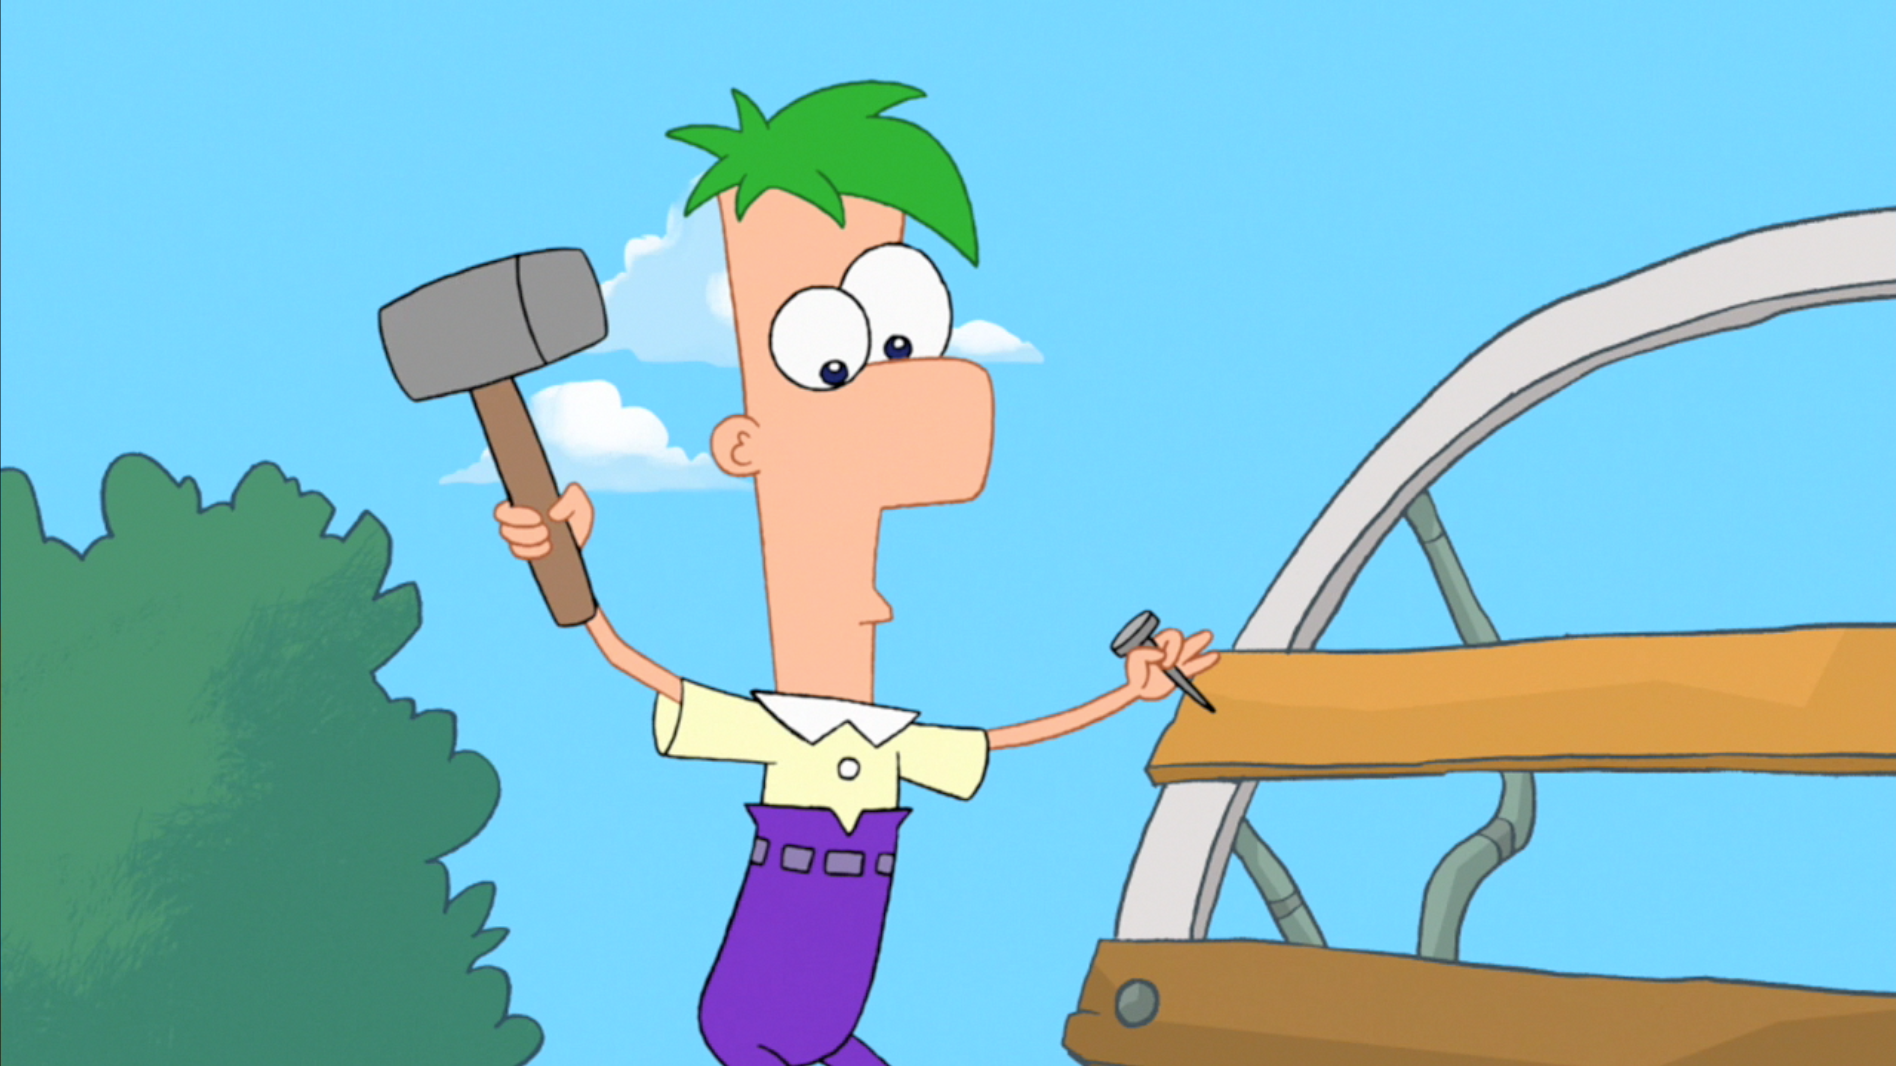 Phineas And Ferb Ginger Porn - Ferb Fletcher | Phineas and Ferb Wiki | FANDOM powered by Wikia